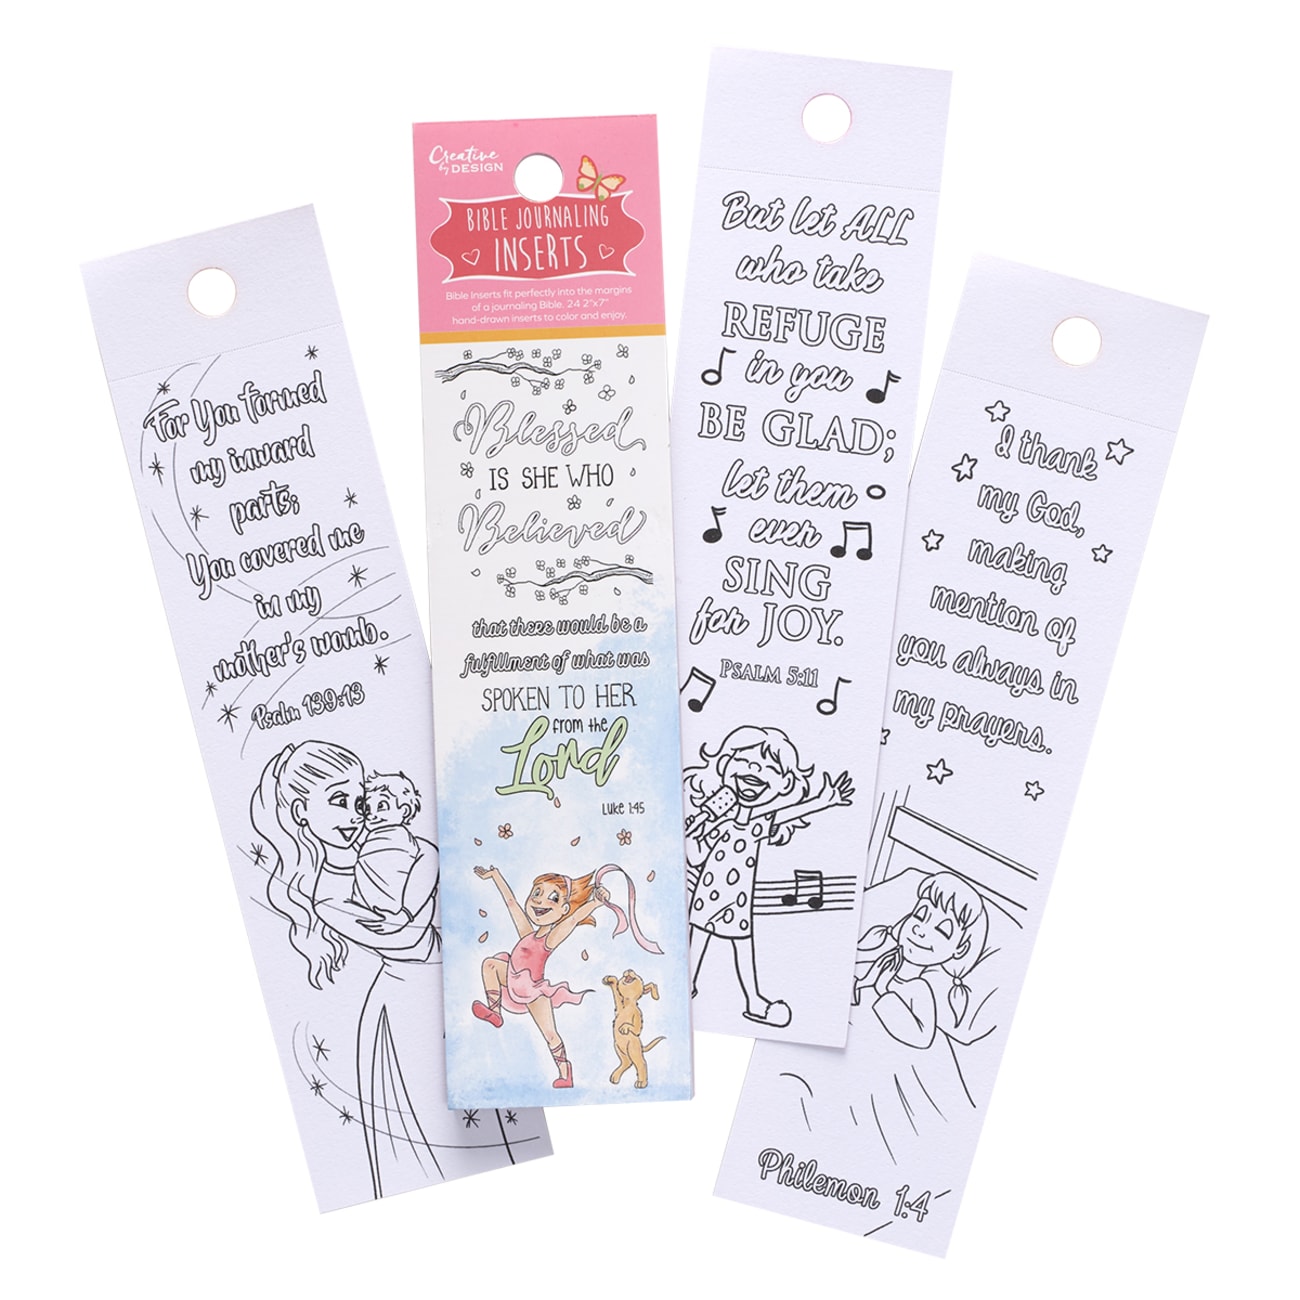 Bible Journaling Column Inserts (24 Pack) Stationery